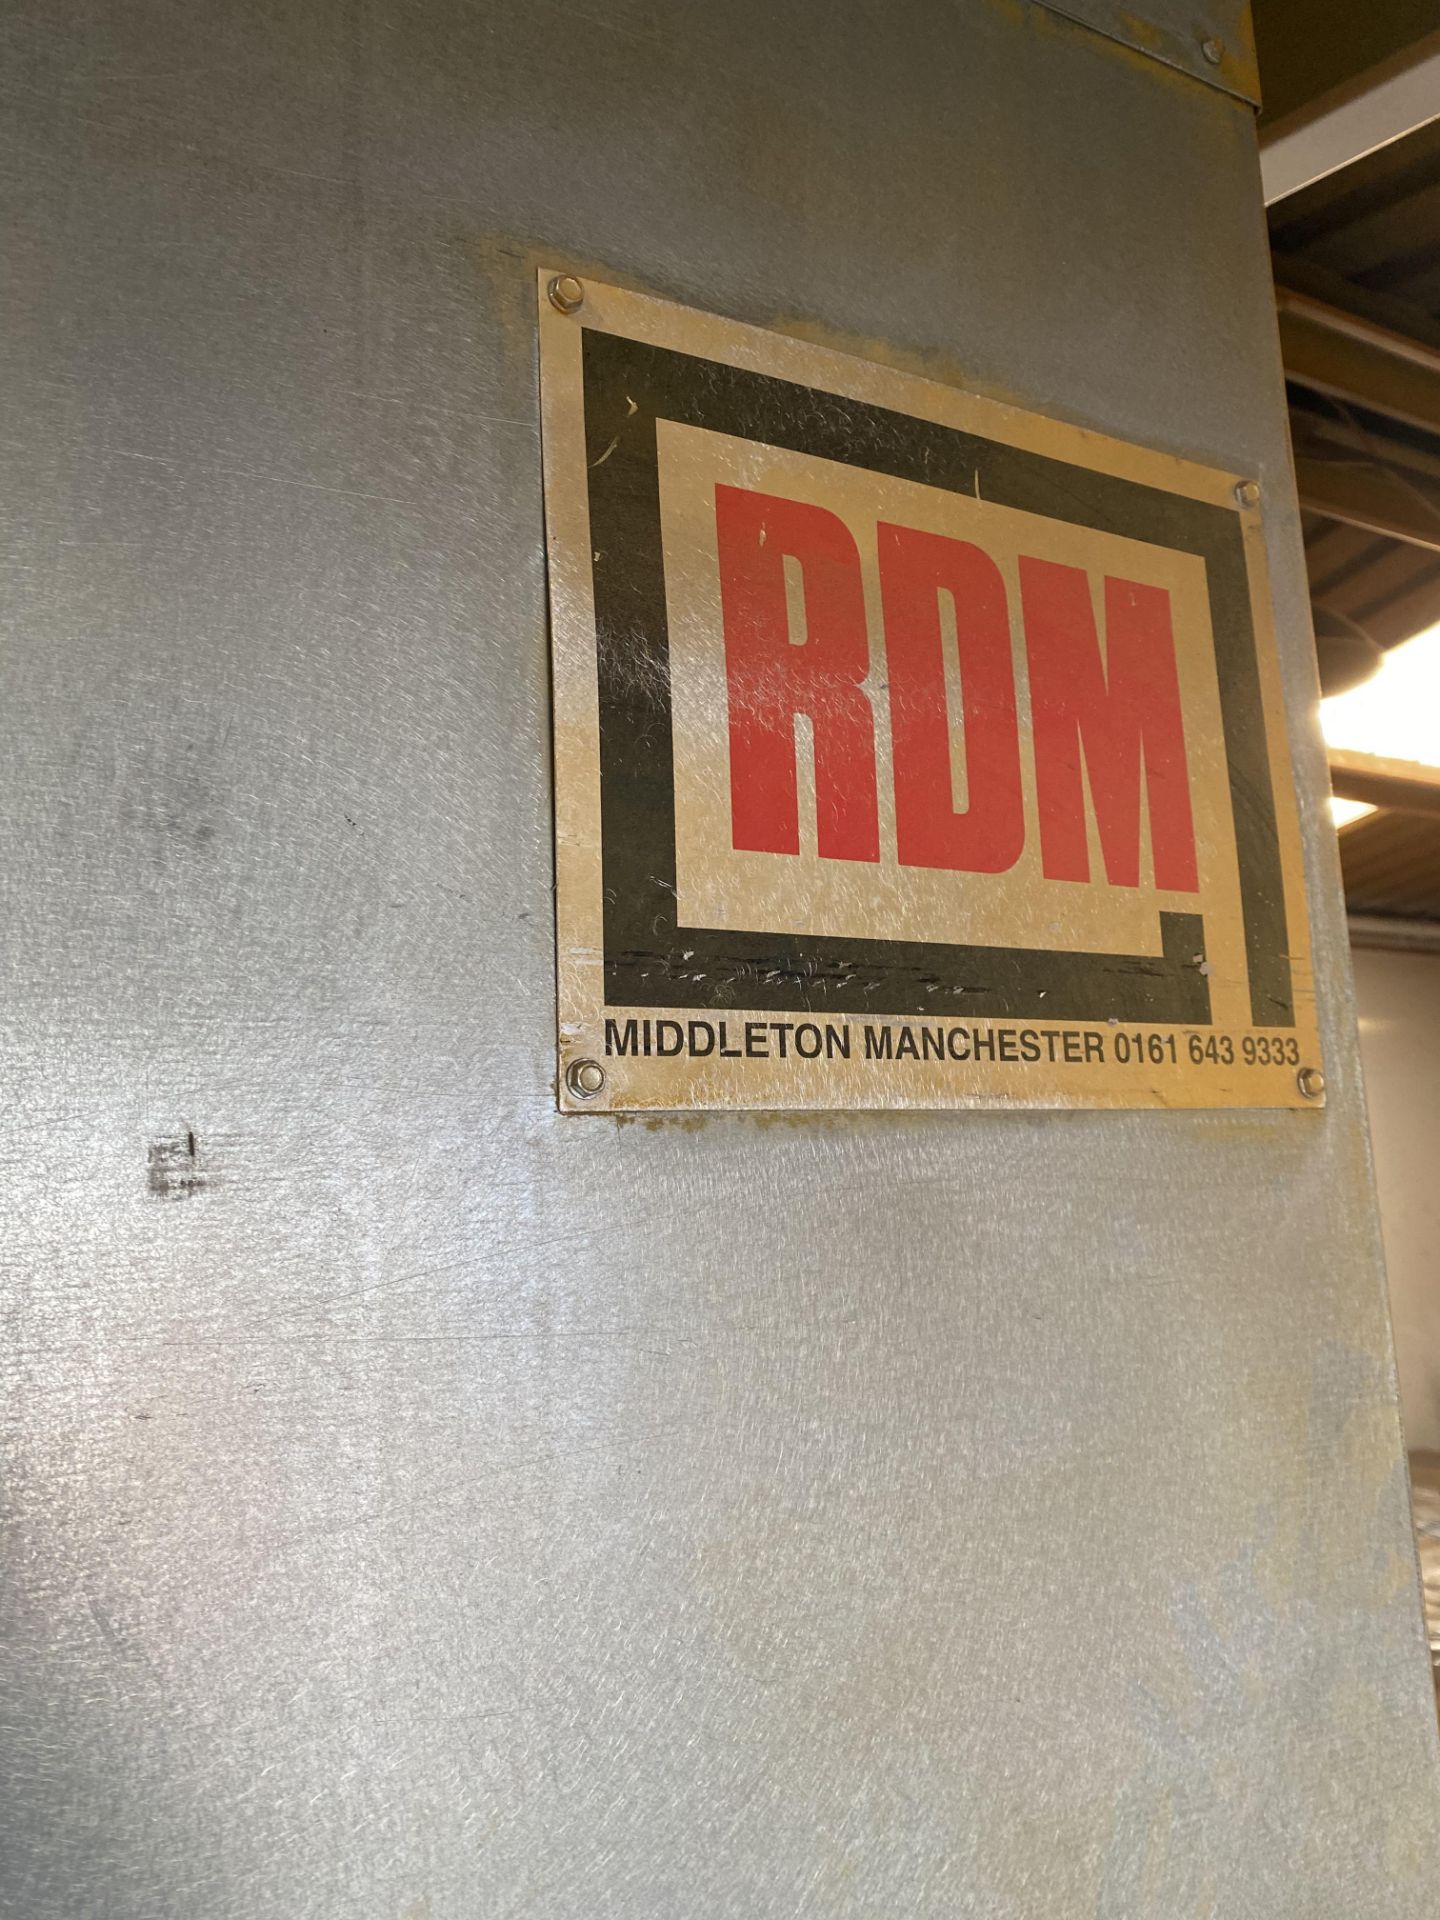 RDM OVEN & WASH BACK BOOTH POWDER COATING COMPLETE PLANT ON GAS WITH POWDER COATING GUNS - Image 18 of 18